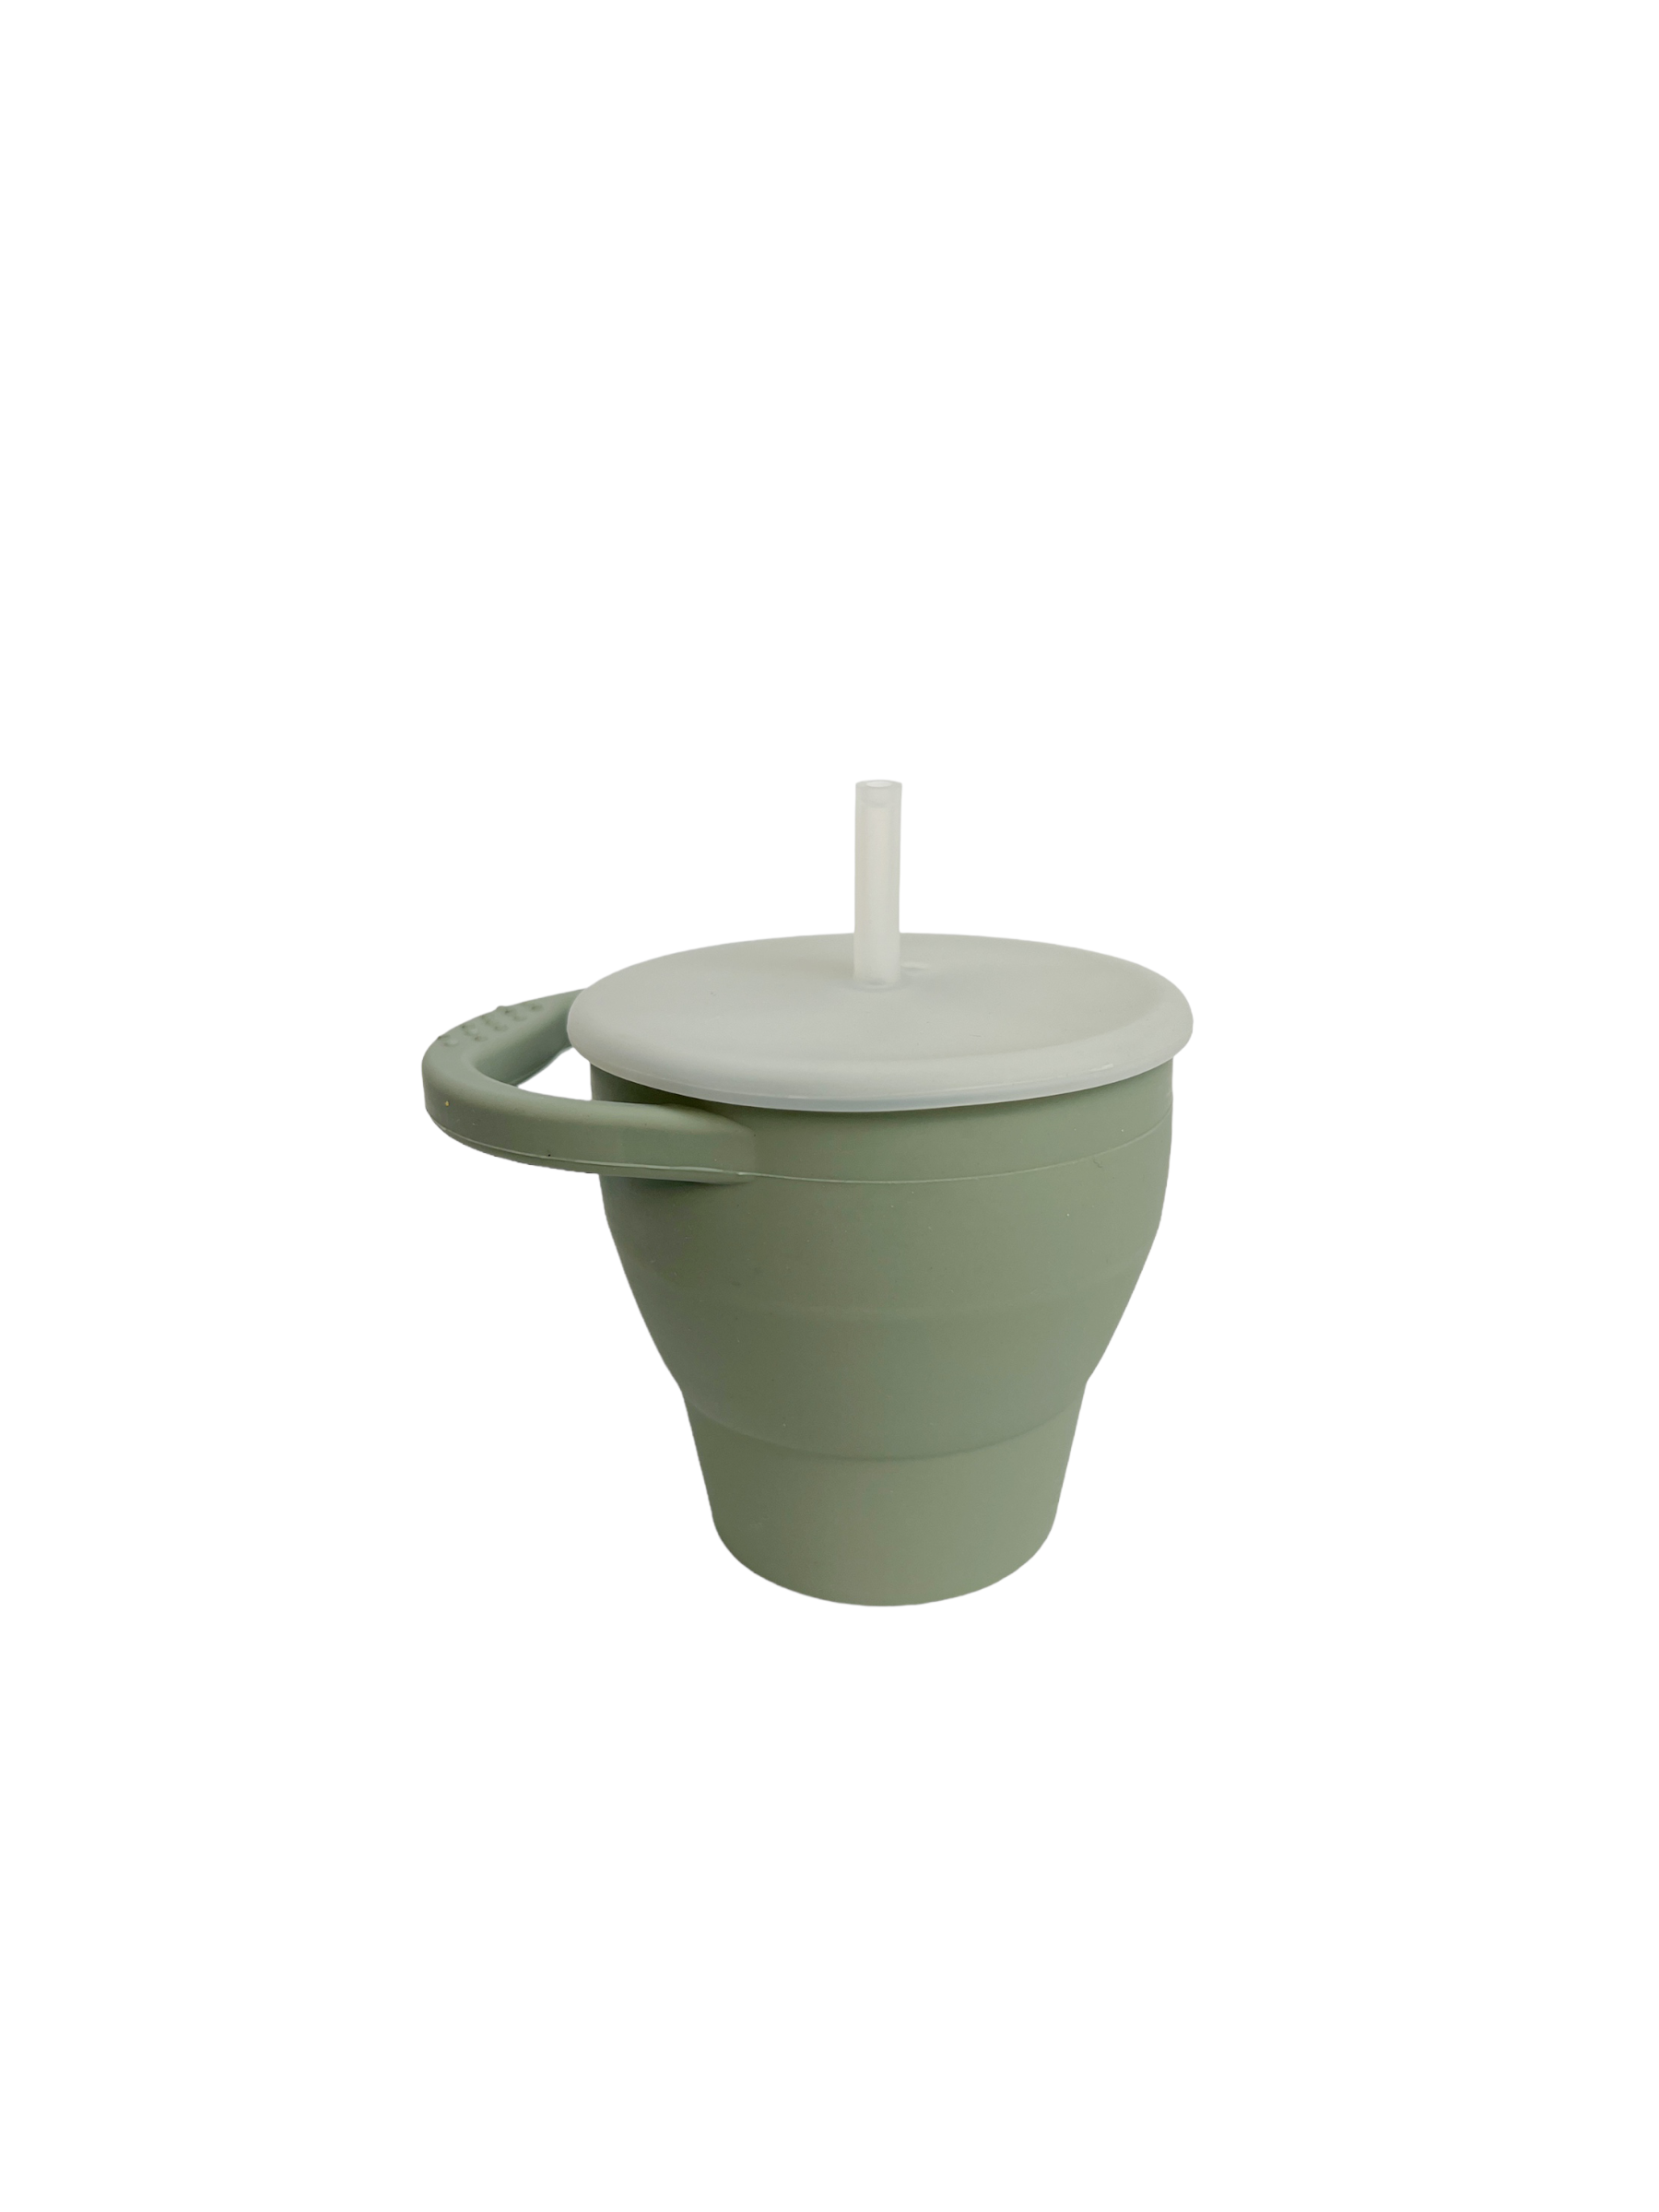 Moss Collapsible 2-in-1 Cup